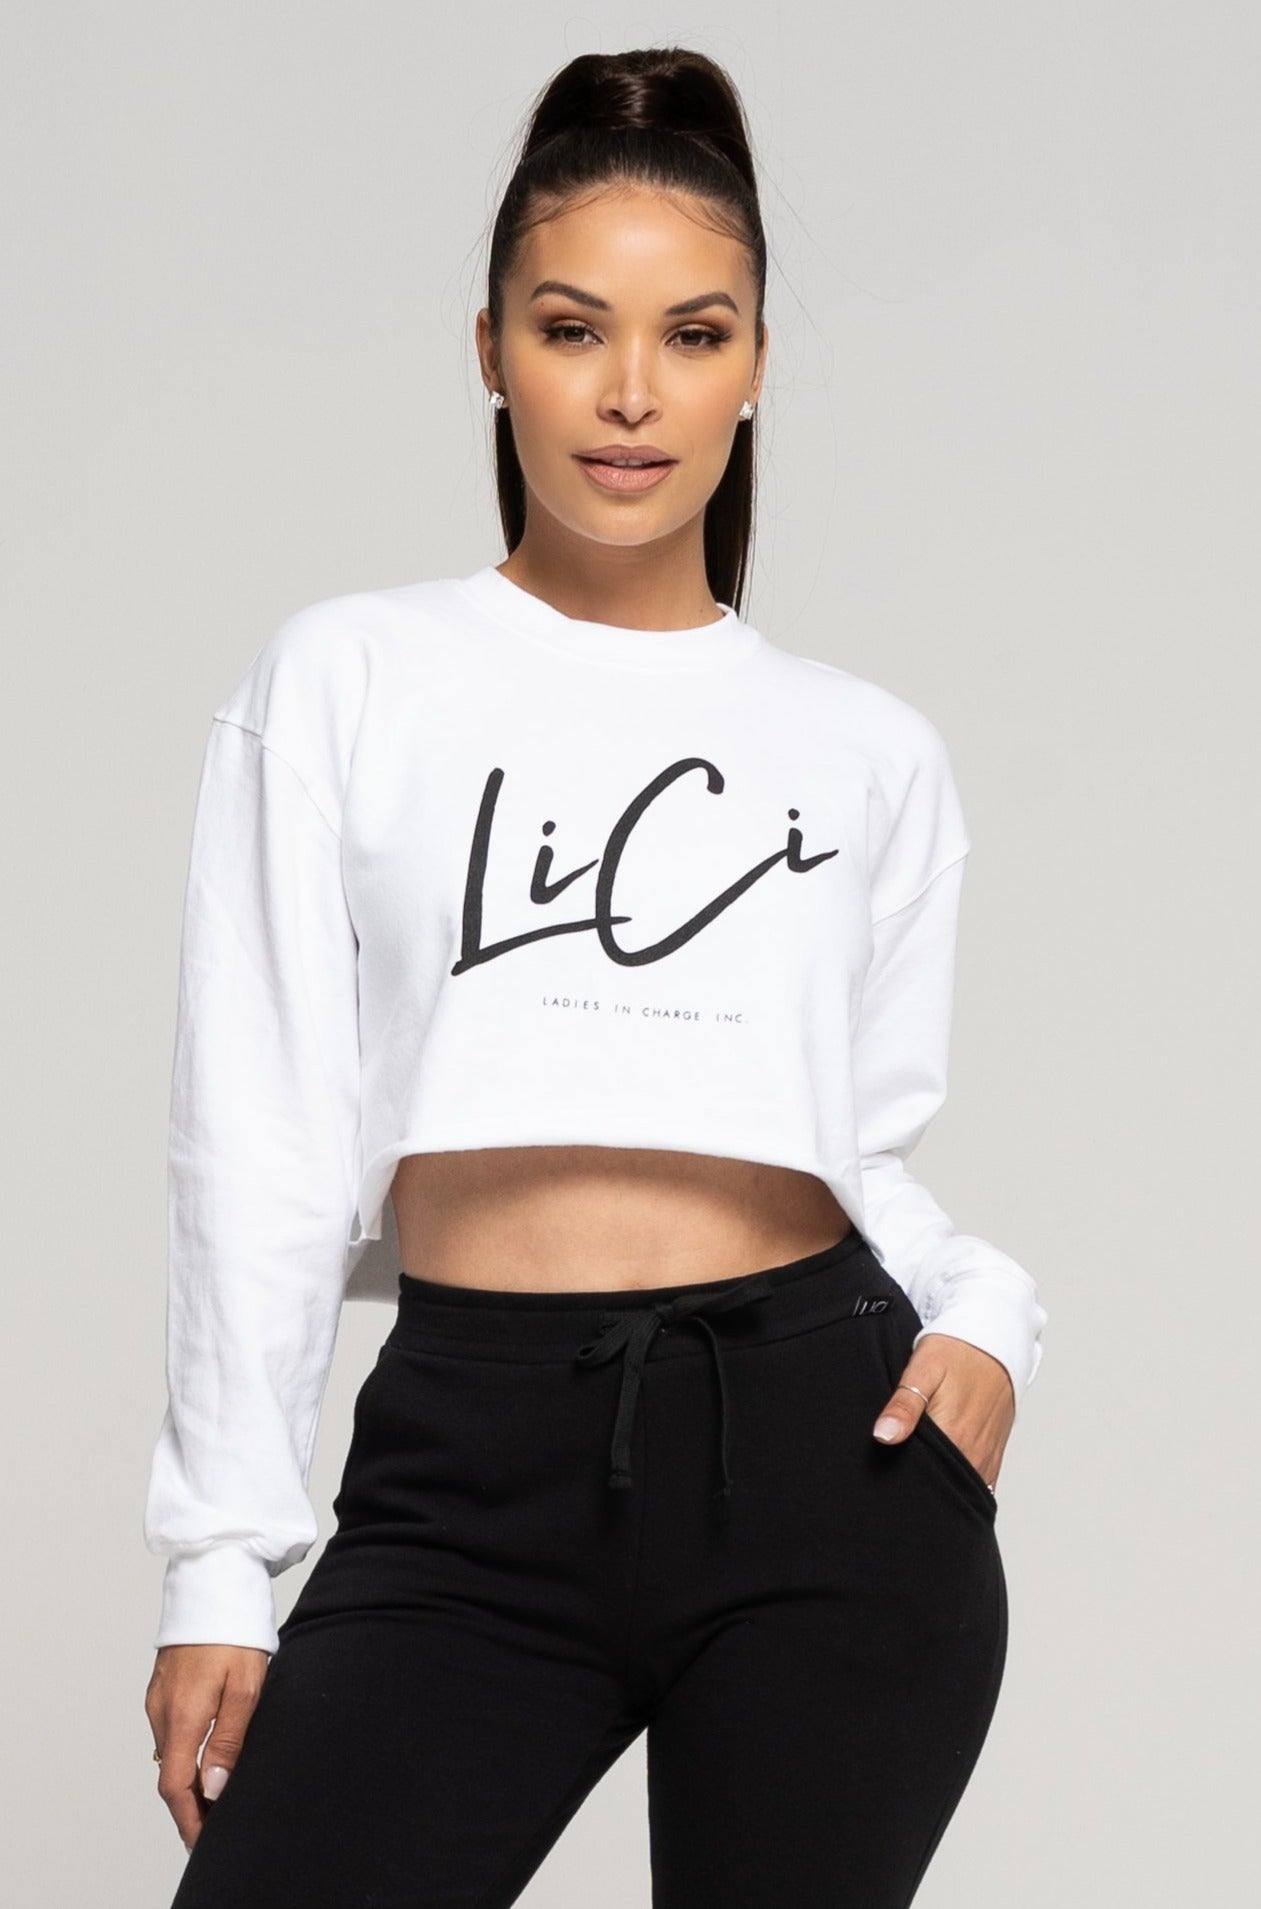 White Ladies in Charge Cropped Crewneck